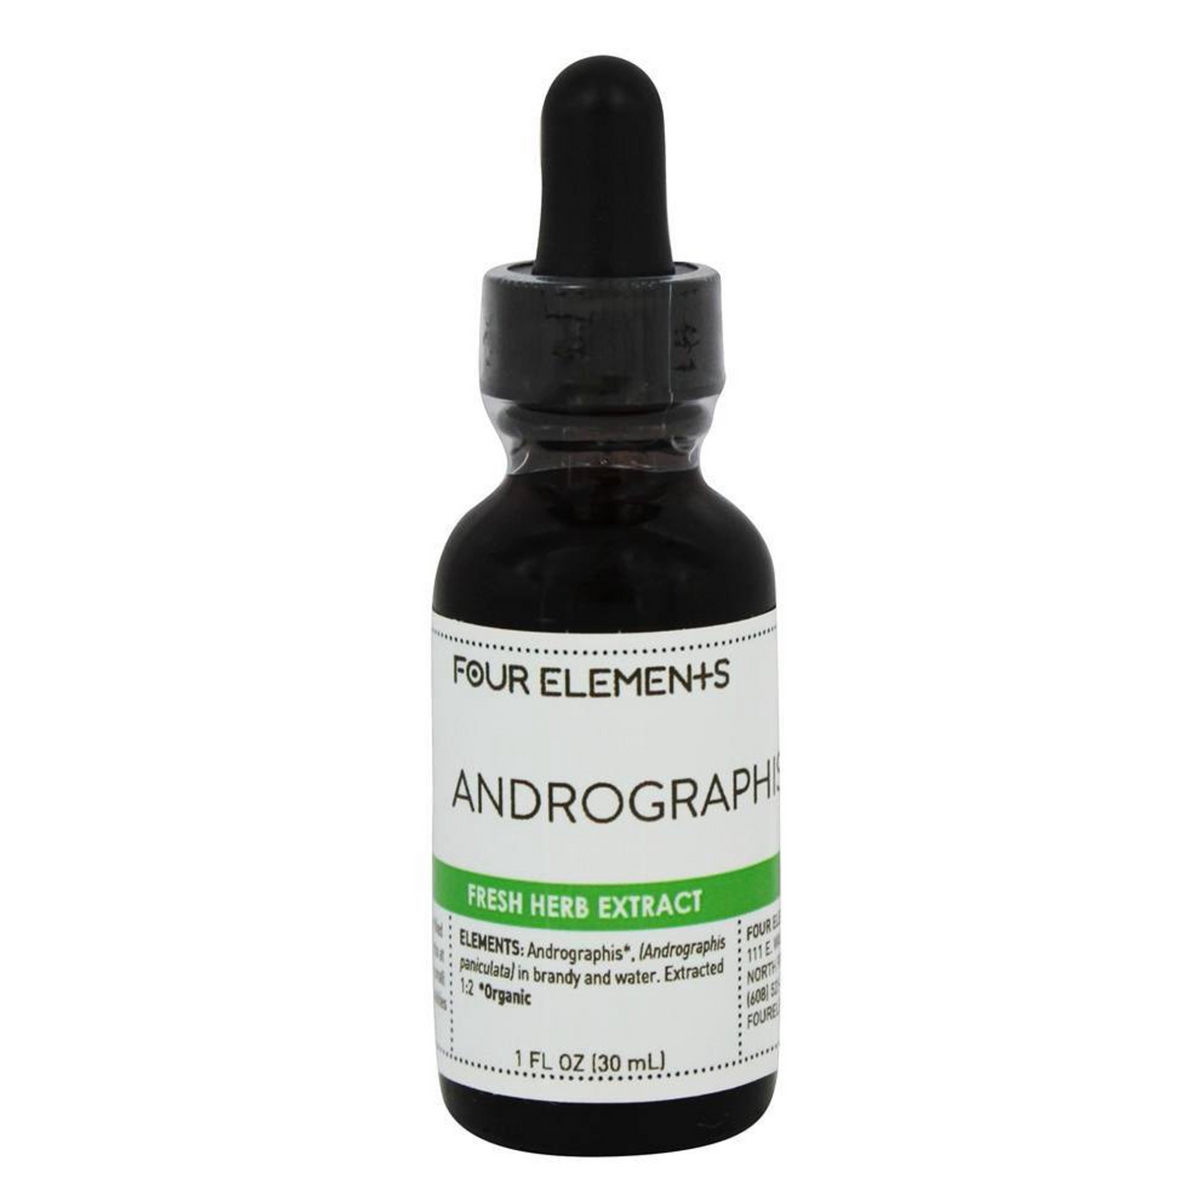 Primary Image of Four Elements Andrographis Tincture (1 fl oz)